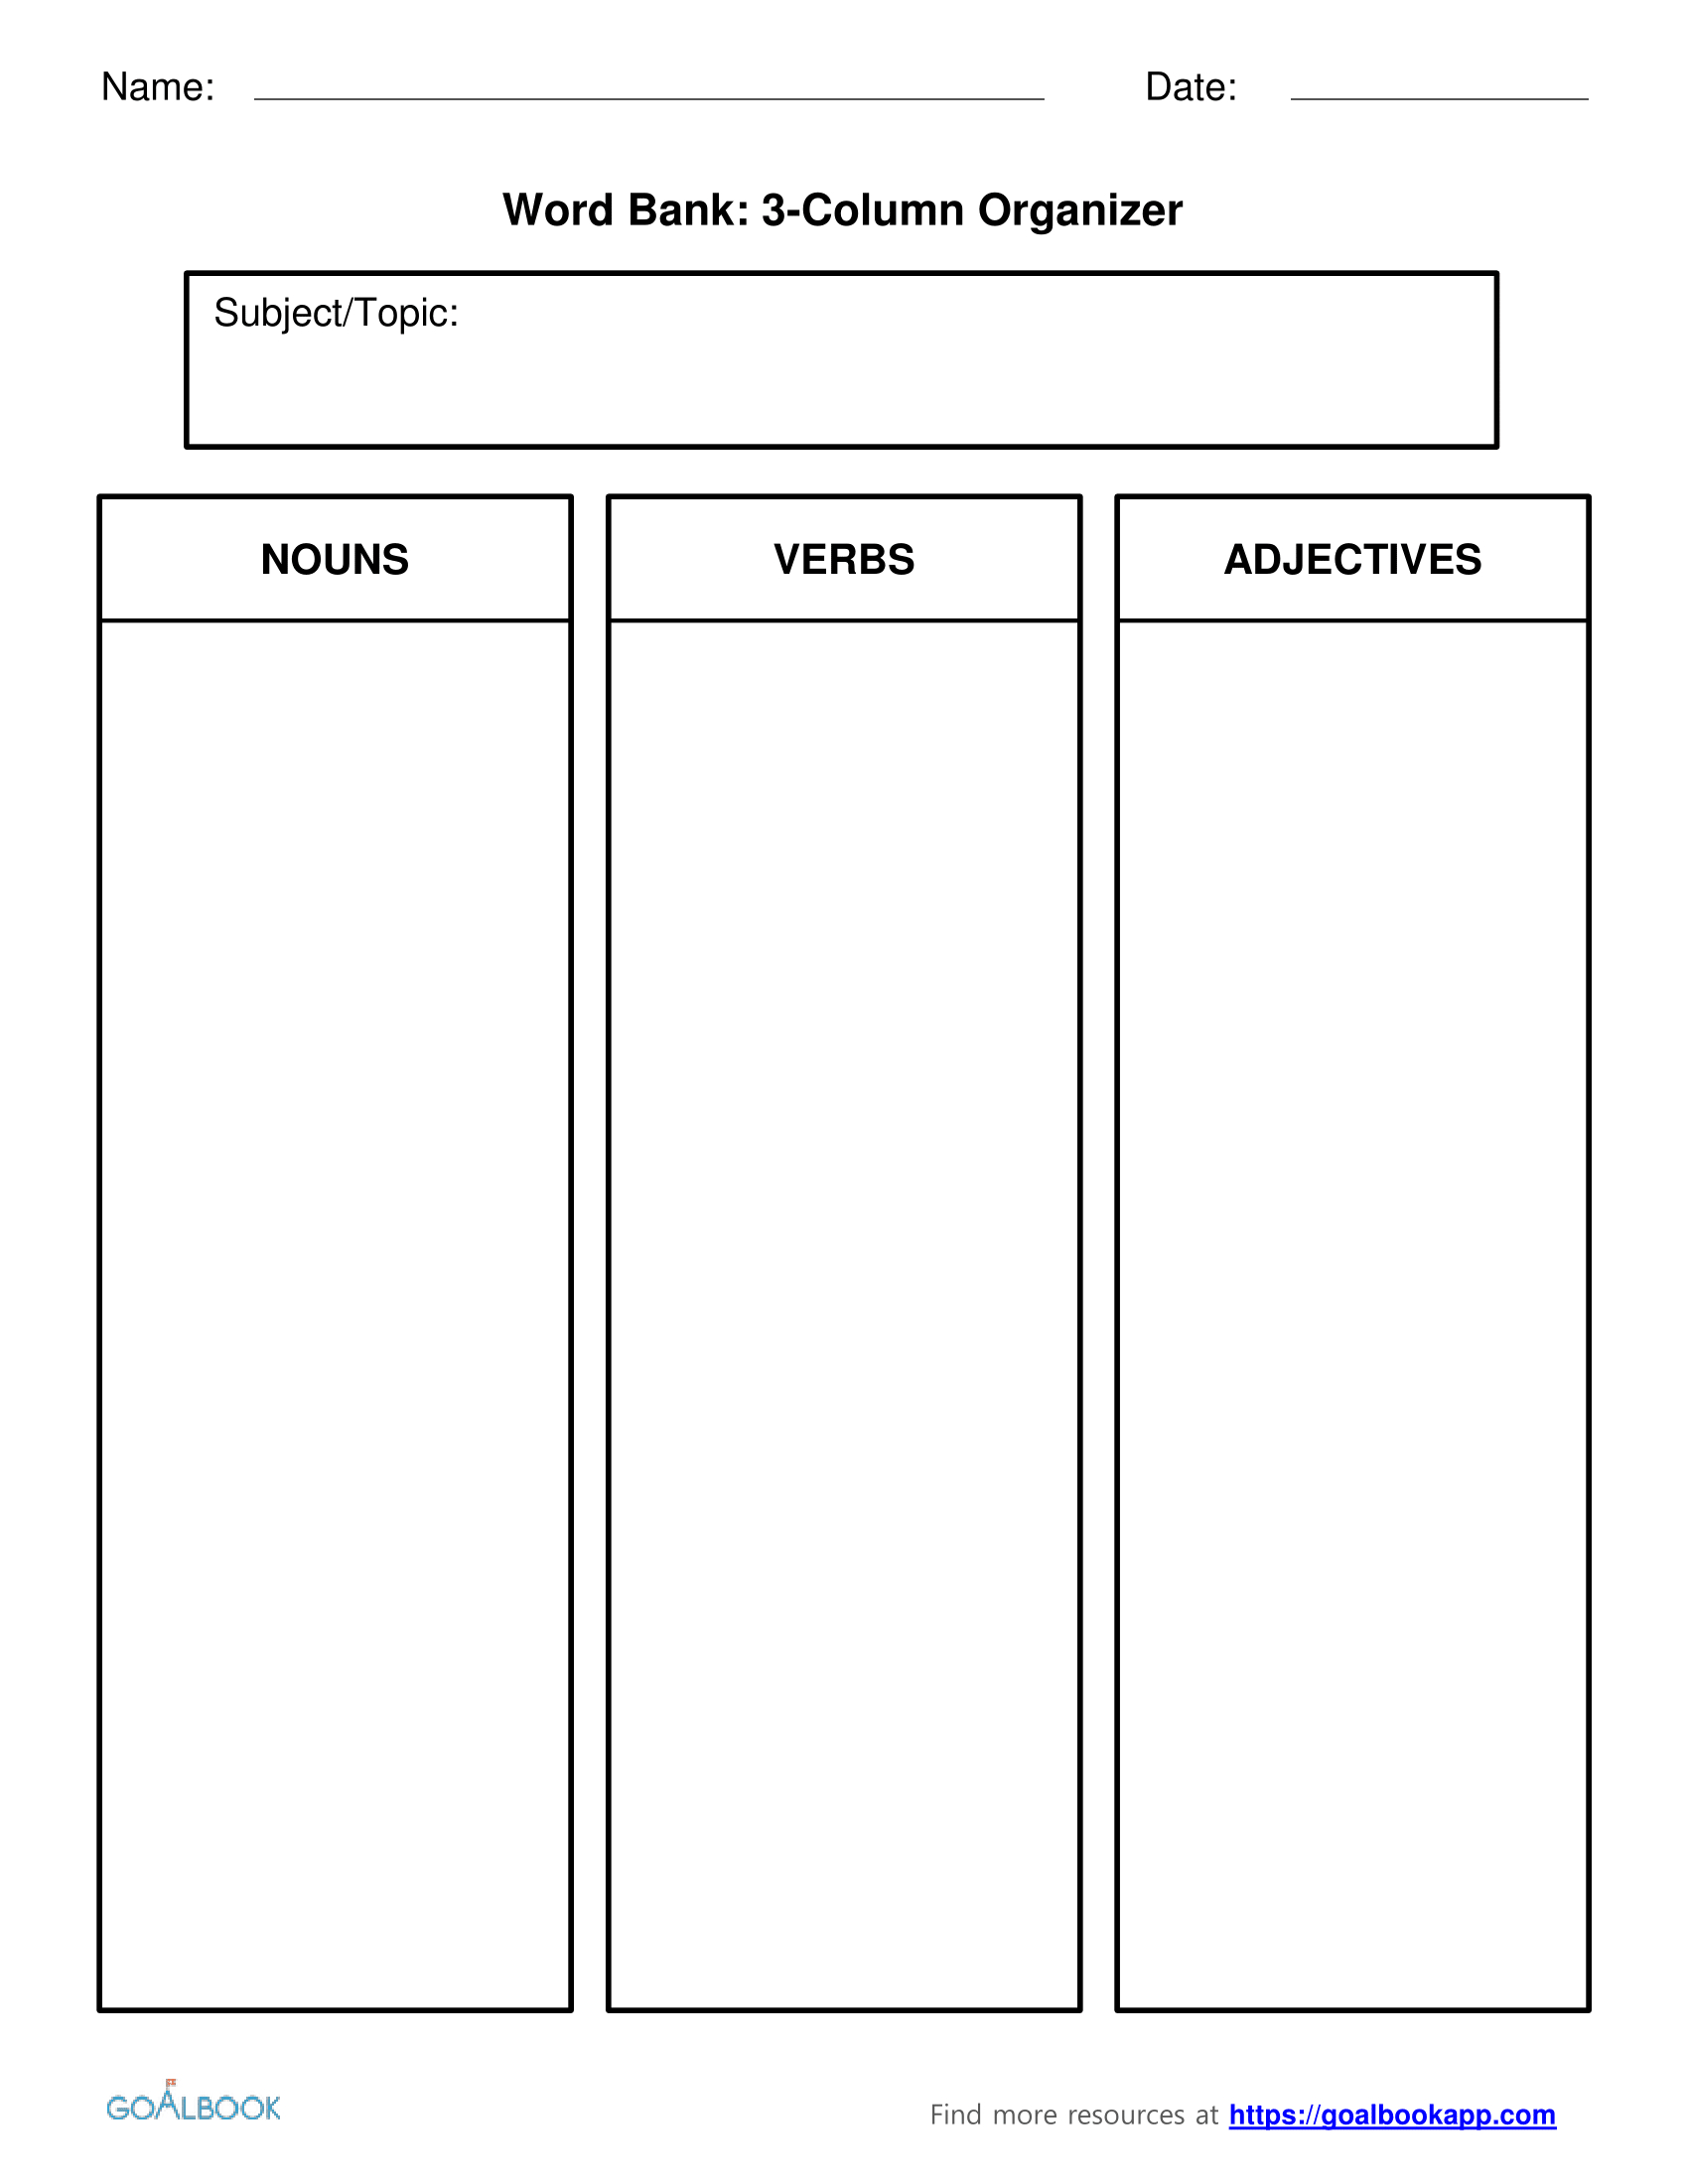 Word Bank | Udl Strategies – Goalbook Toolkit With Regard To Personal Word Wall Template